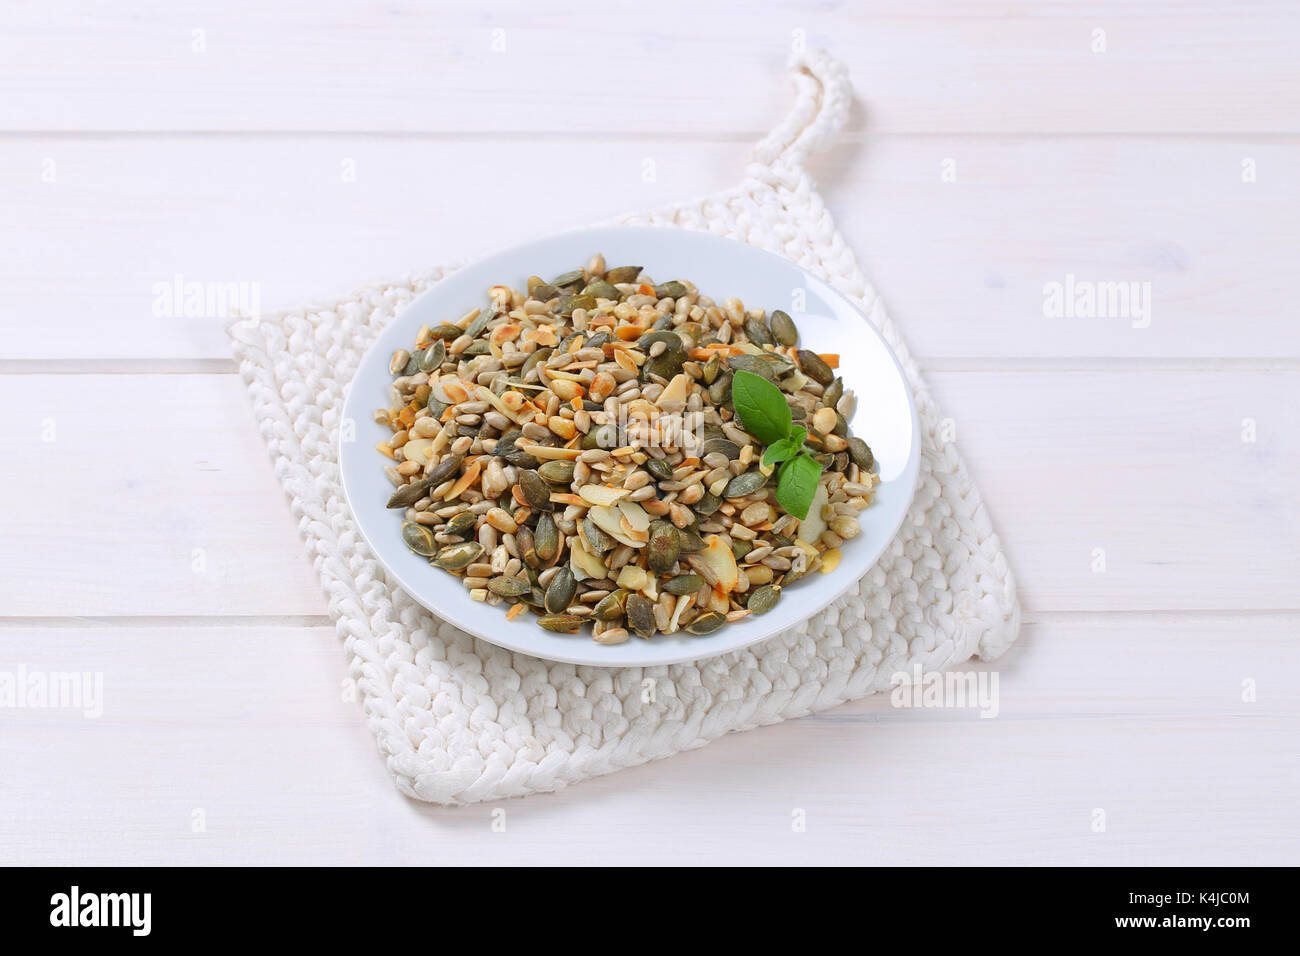 Mix of pumpkin and sunflower seeds with pine nuts and chopped almonds Stock Photo